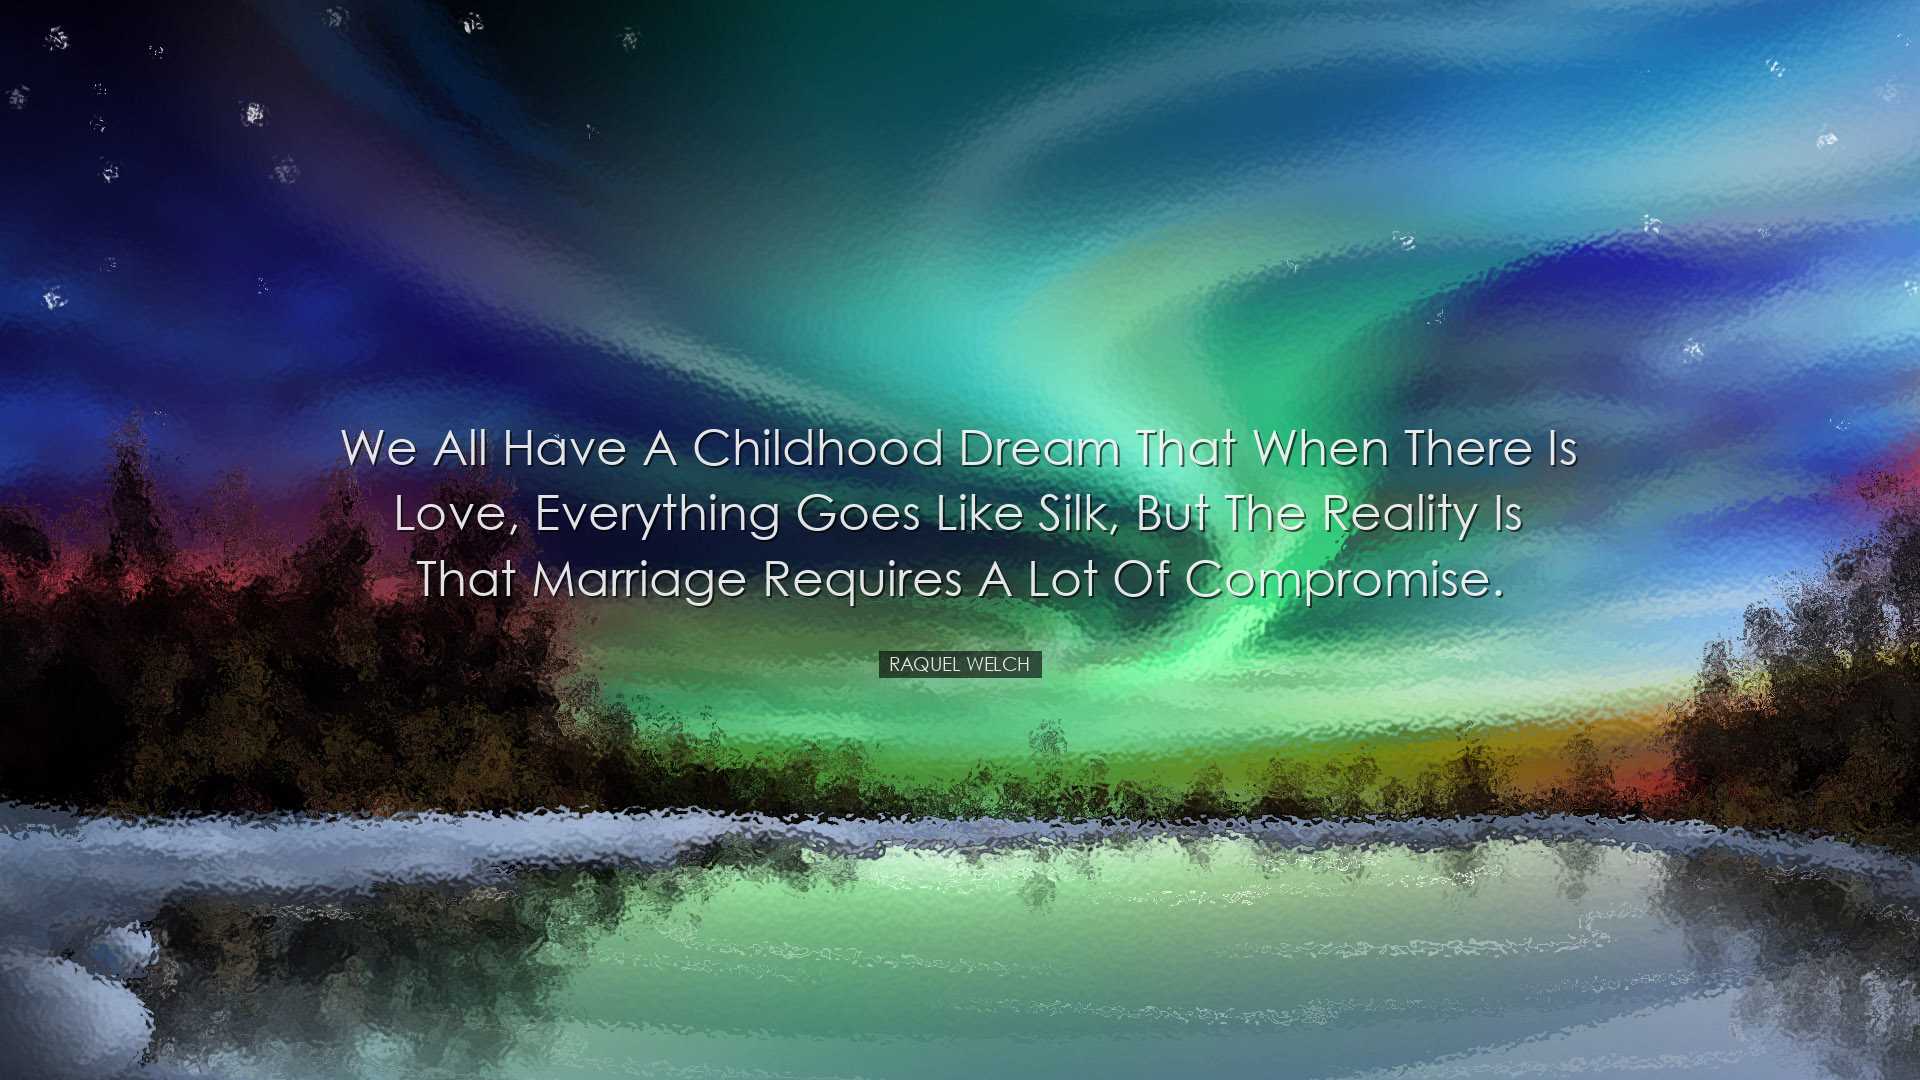 We all have a childhood dream that when there is love, everything